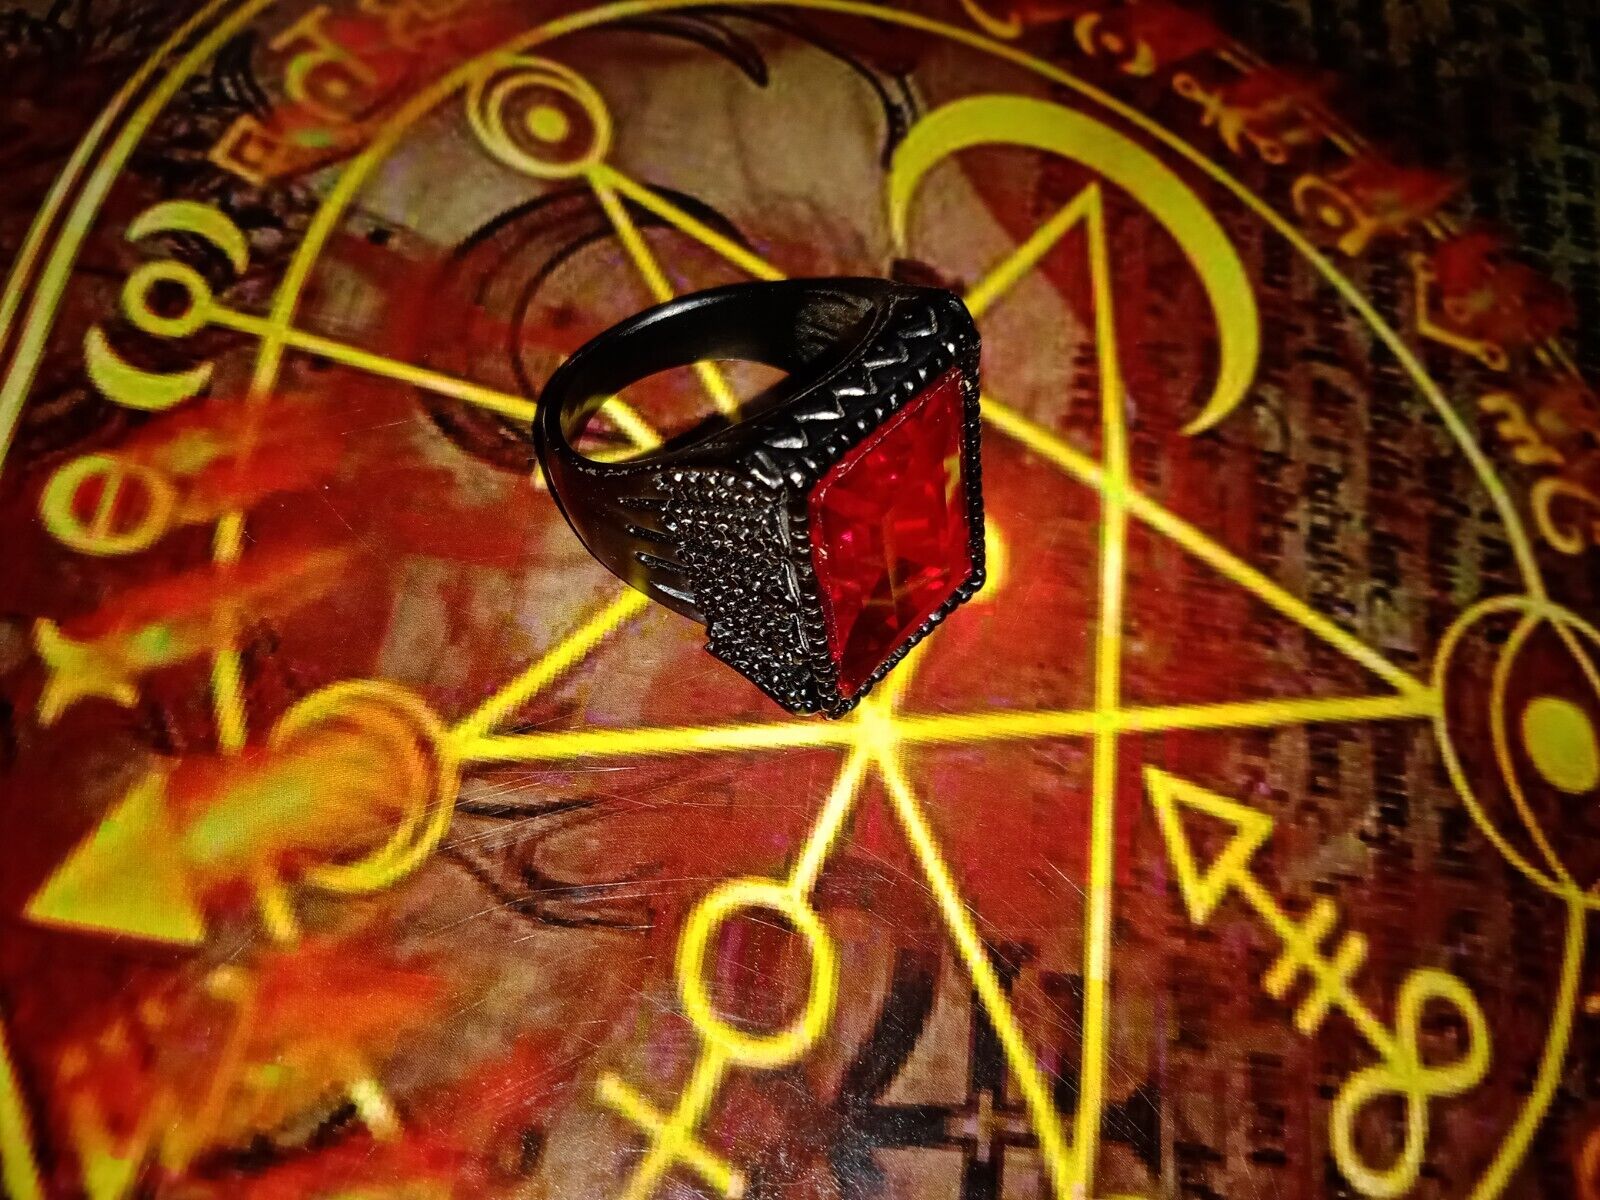 Voodoo Love Ritual Ring Lover Marriage Soul Mate Charisma Sex Partner Blood Ore+